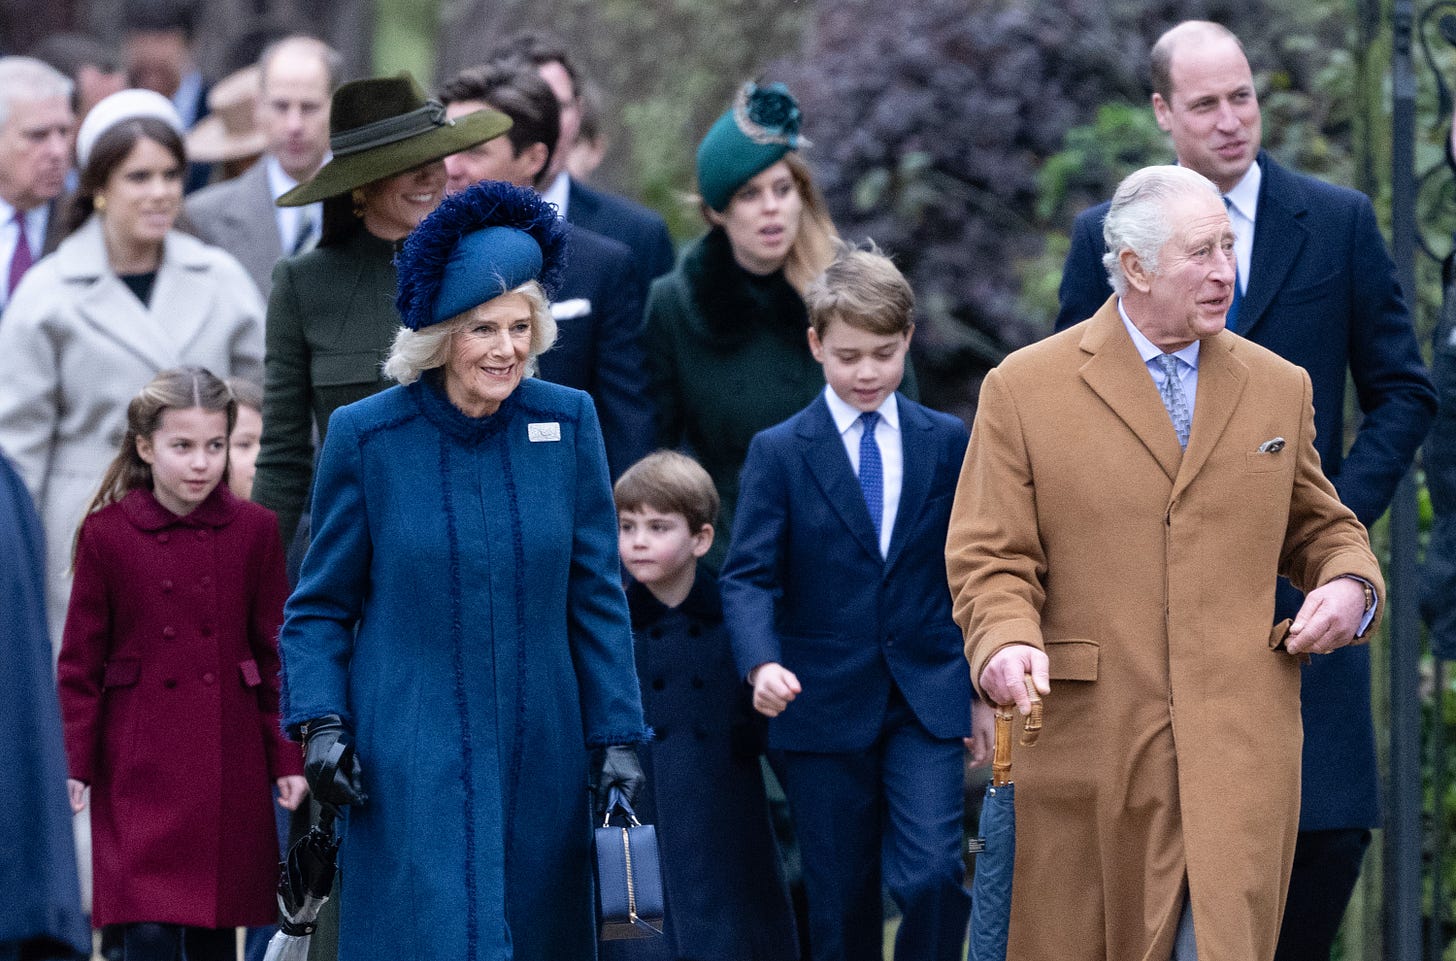 Royals on the walk to church at Sandringham